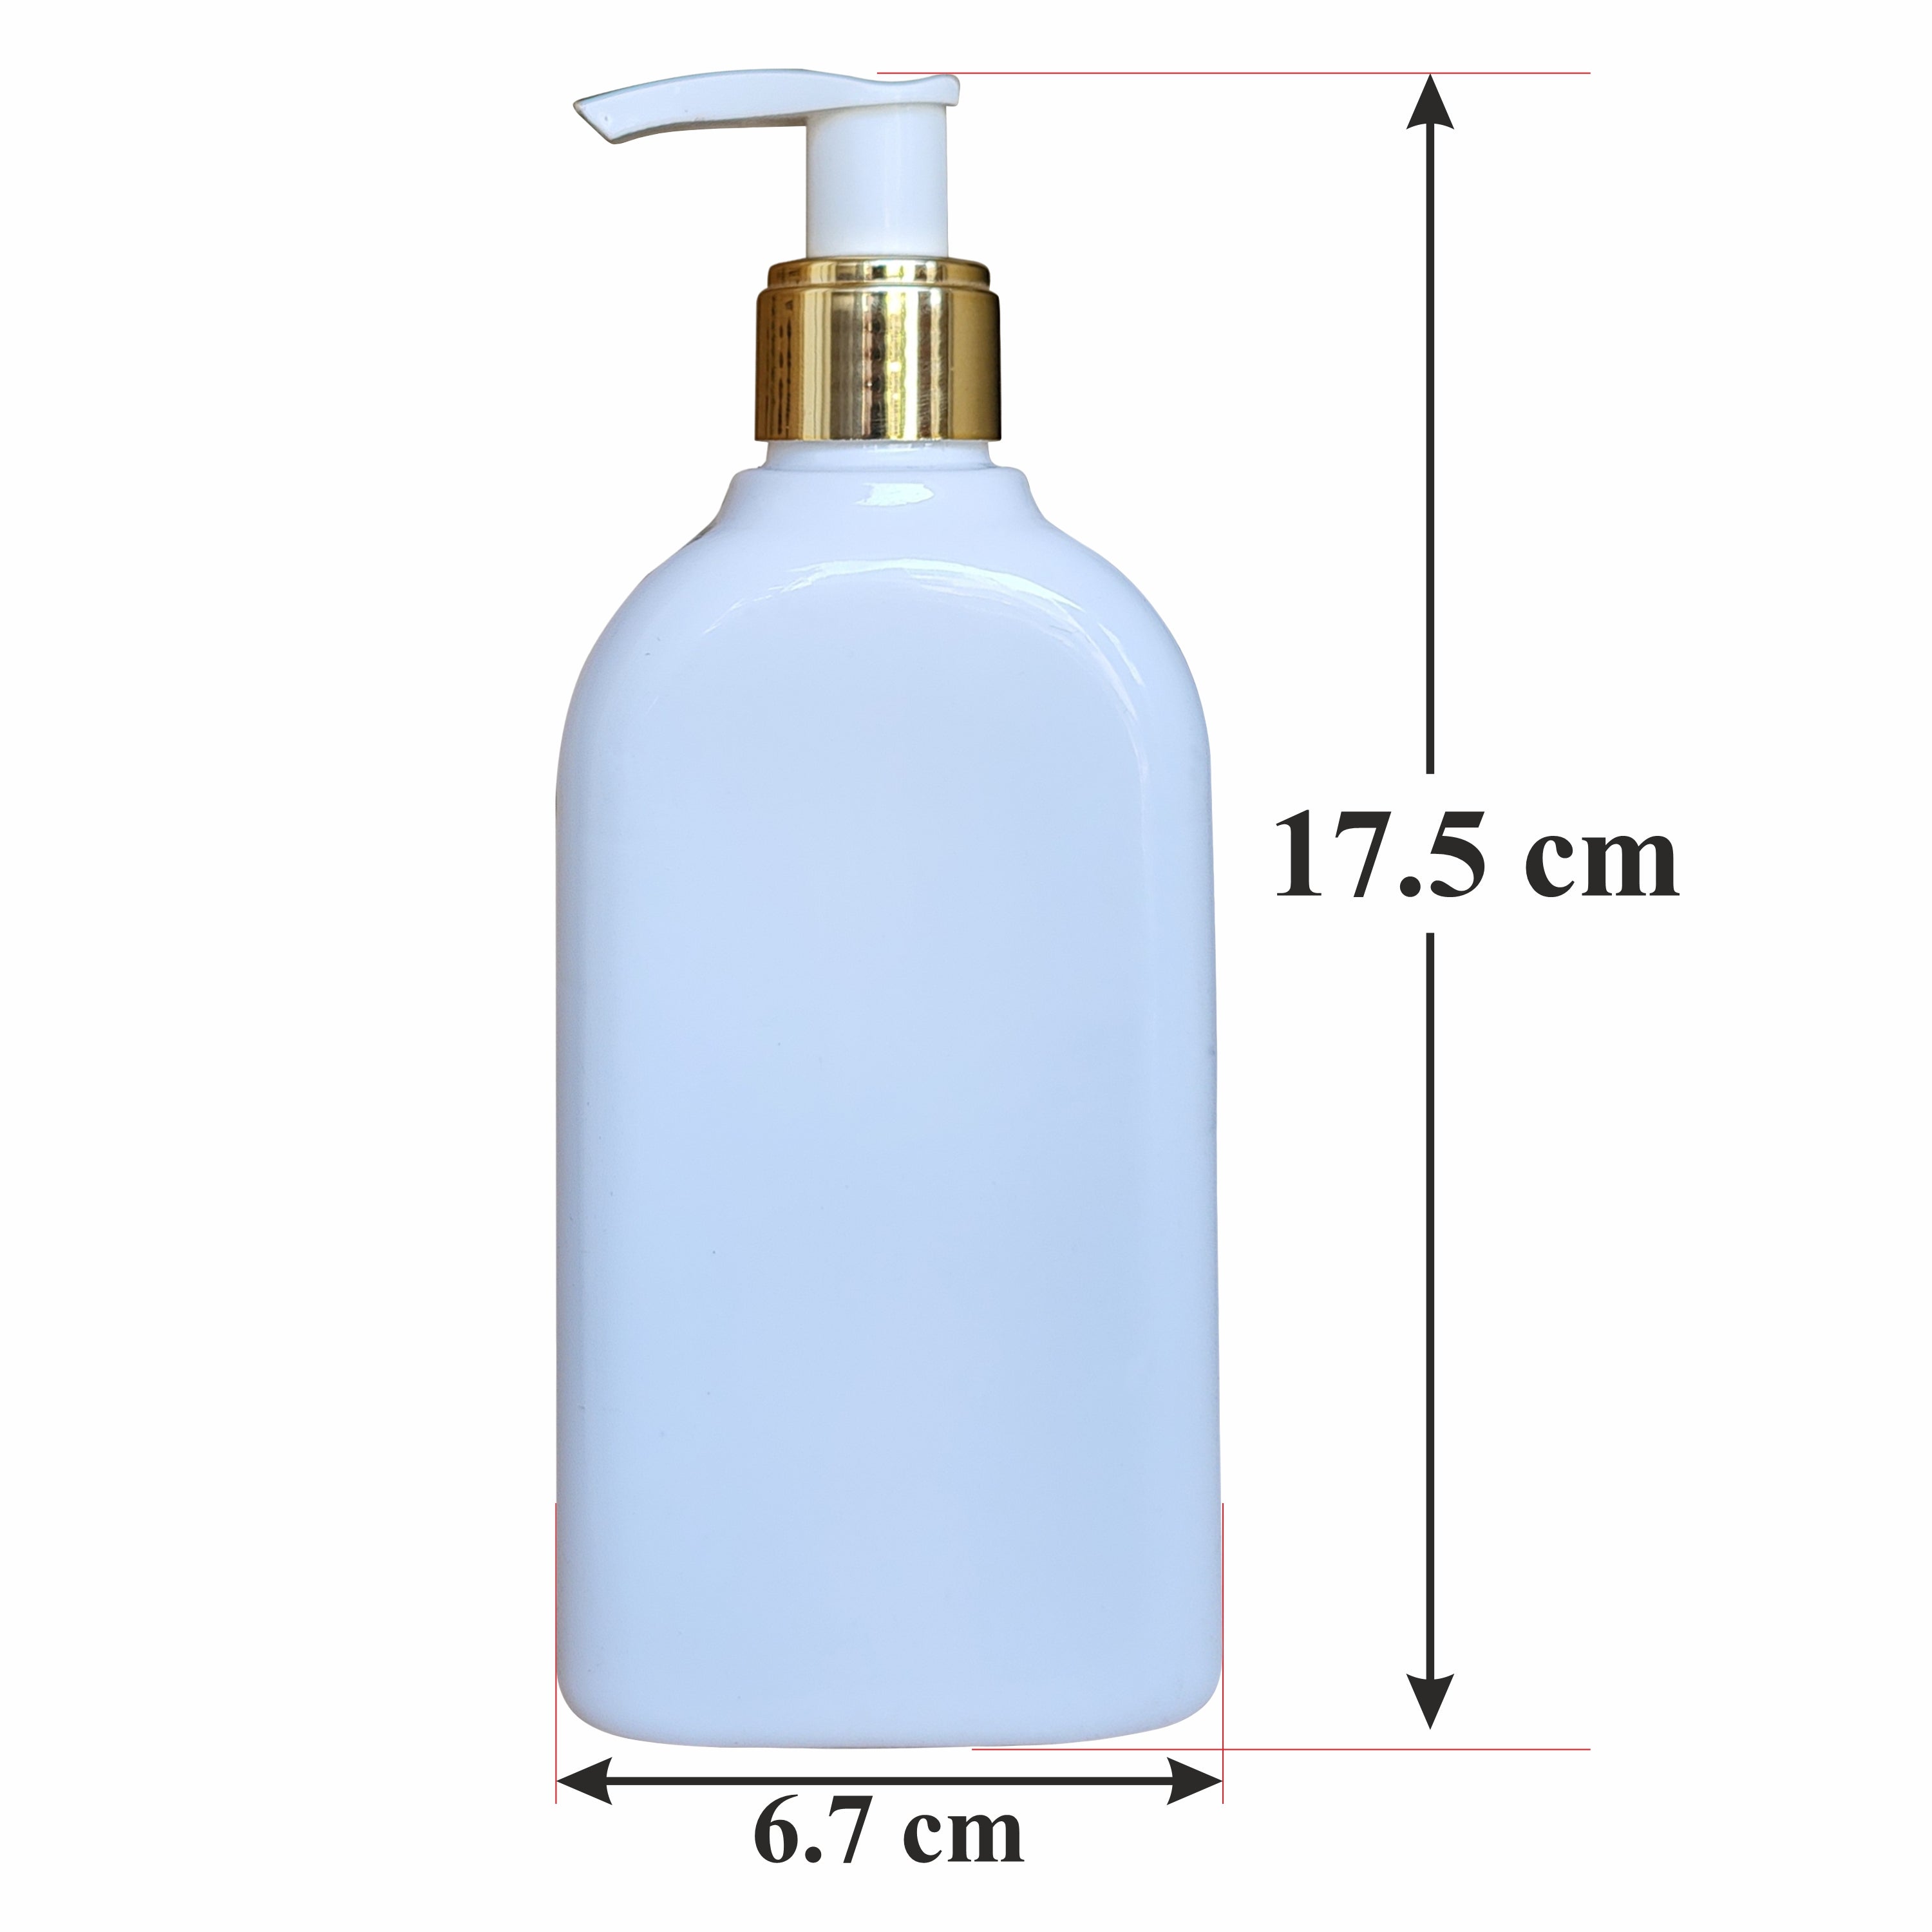 |ZMW69| MILKY WHITE RECTANGLE SHAPE BOTTLE WITH GOLD PLATED WHITE DISPENSER PUMP Available Size: 300ml,